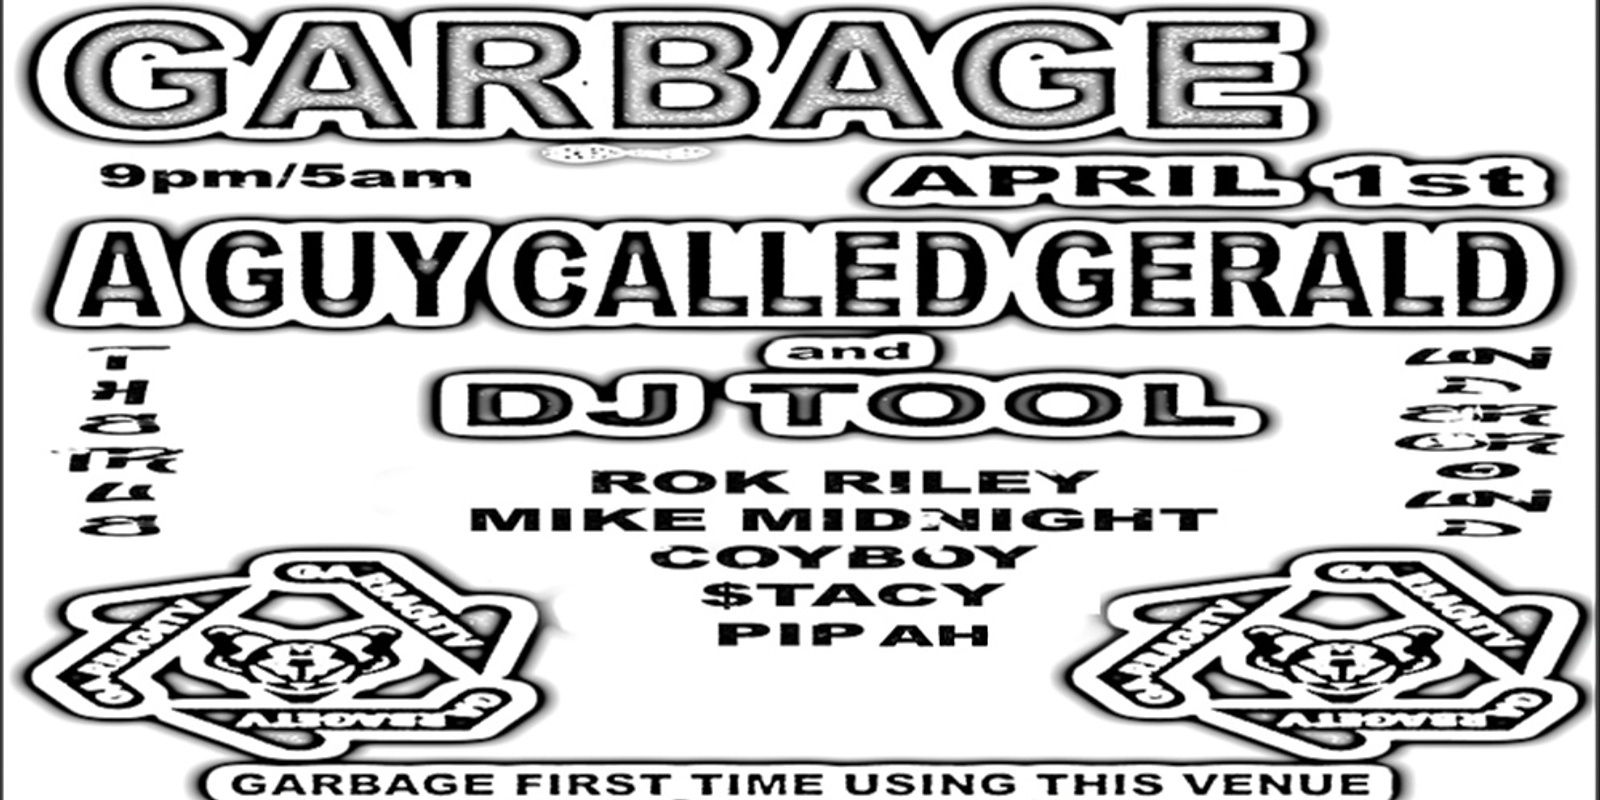 GARBAGE presents A GUY CALLED GERALD and DJ TOOL